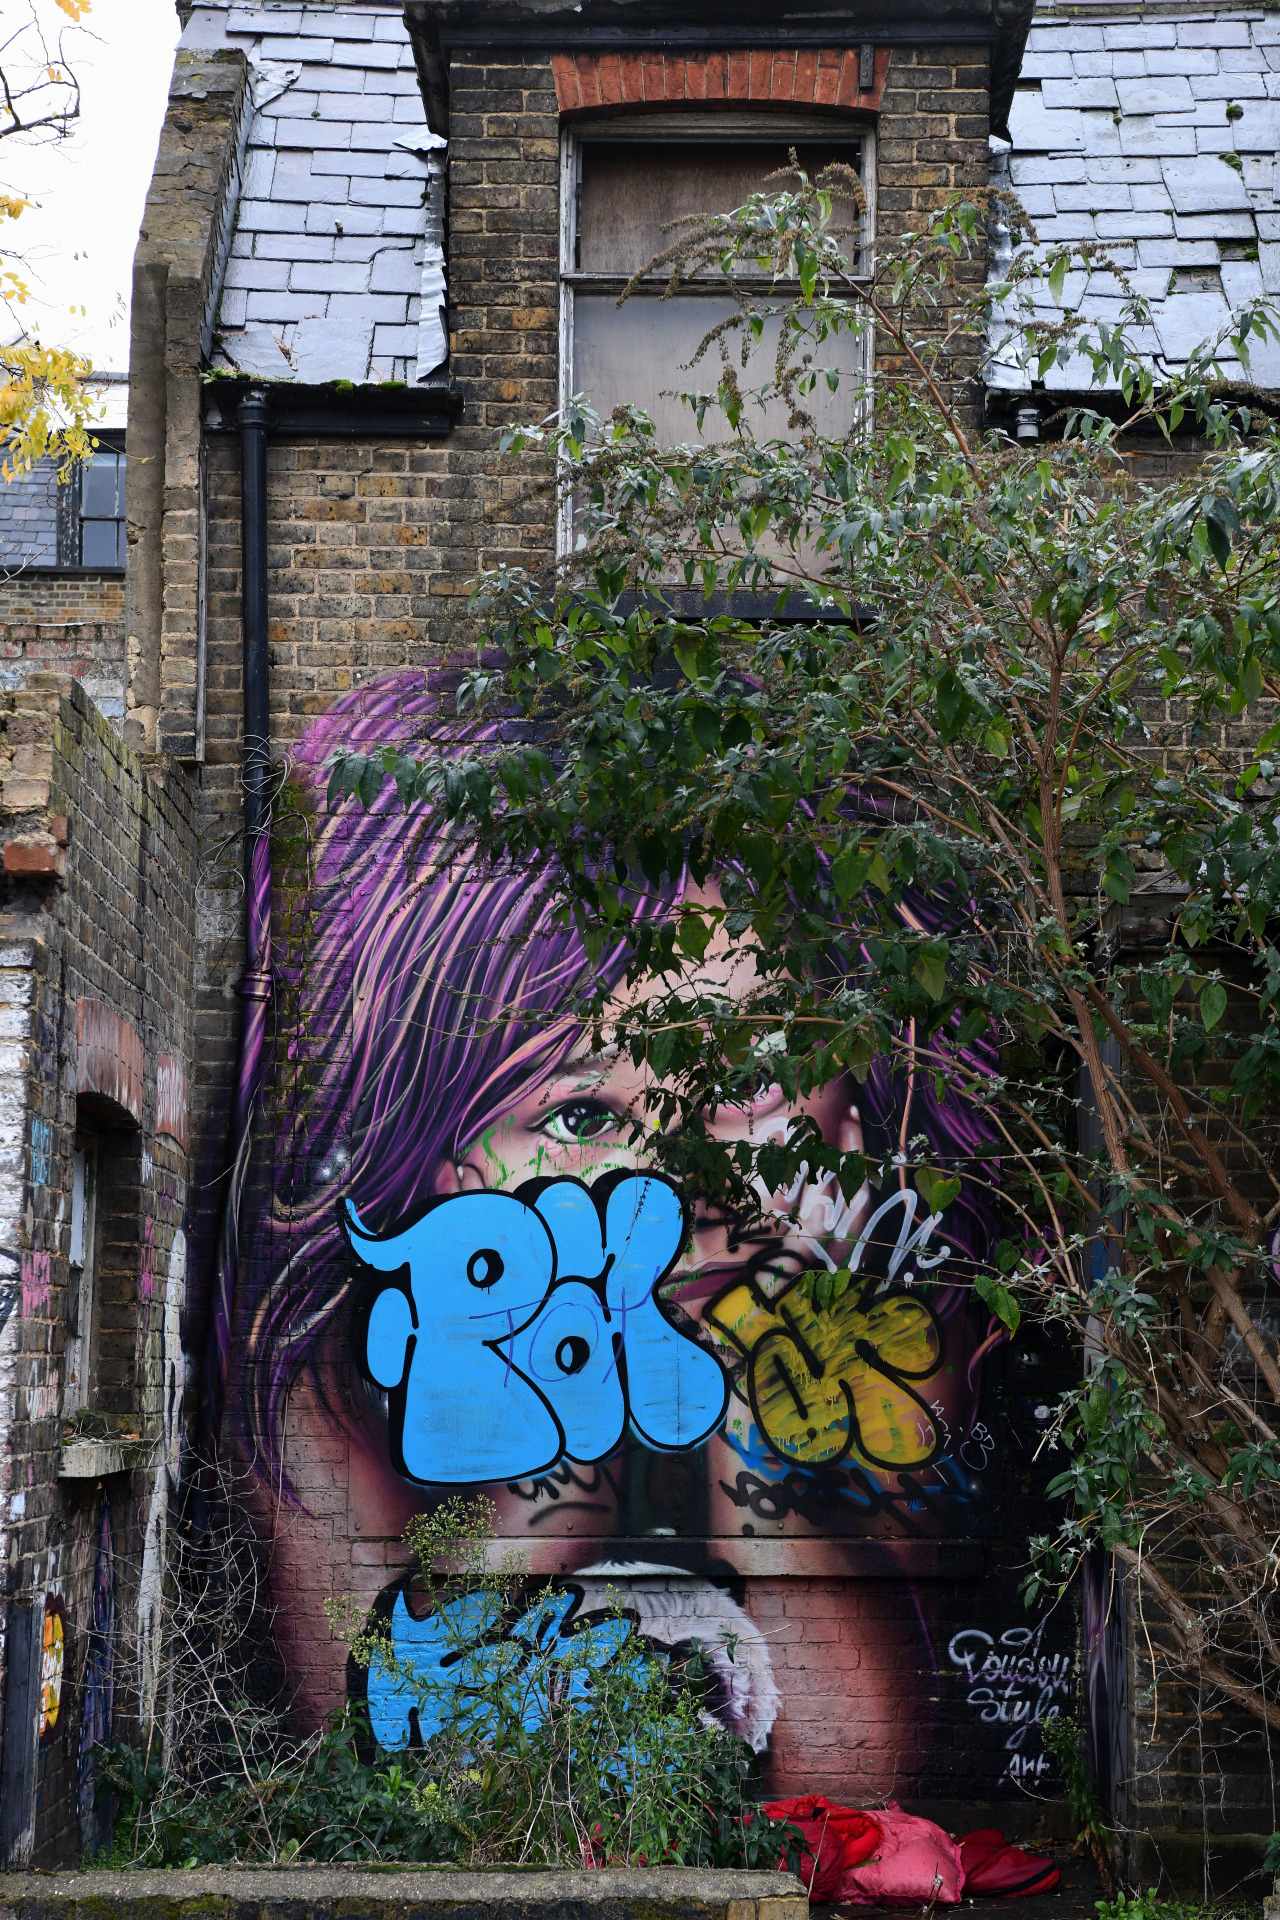 London Edge — The remains of a girl with purple hair by Dou Dou...